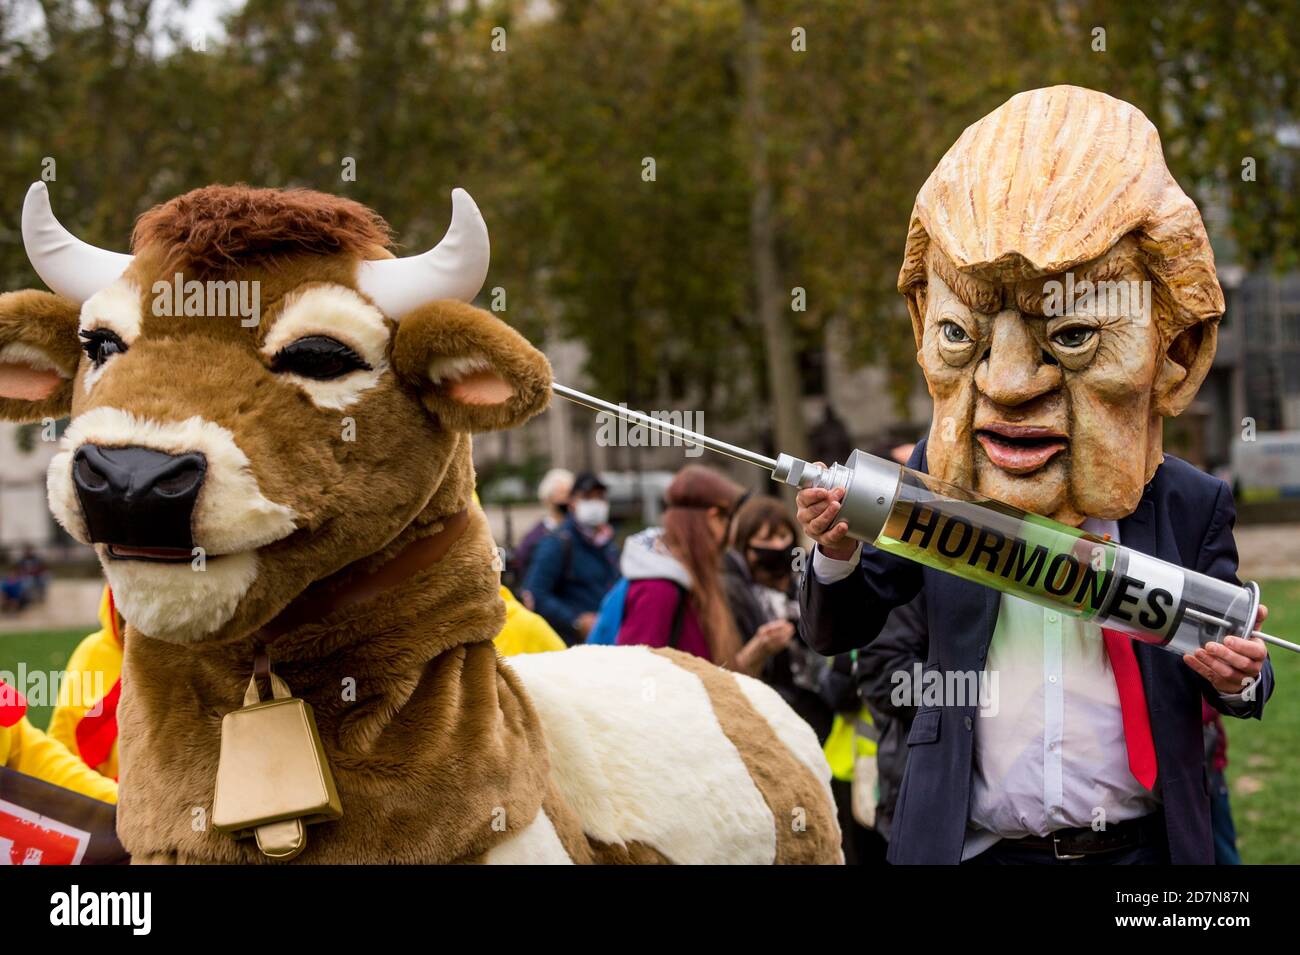 London, UK.  24 October 2020.  Characters dressed as Donald Trump, President of the United States, a pantomime cow and chlorinated chickens join people in Parliament Square protesting against a post-Brexit trade deal with the USA claiming that, amongst other reasons, the NHS and food standards would be negatively affected.  Credit: Stephen Chung / Alamy Live News Stock Photo